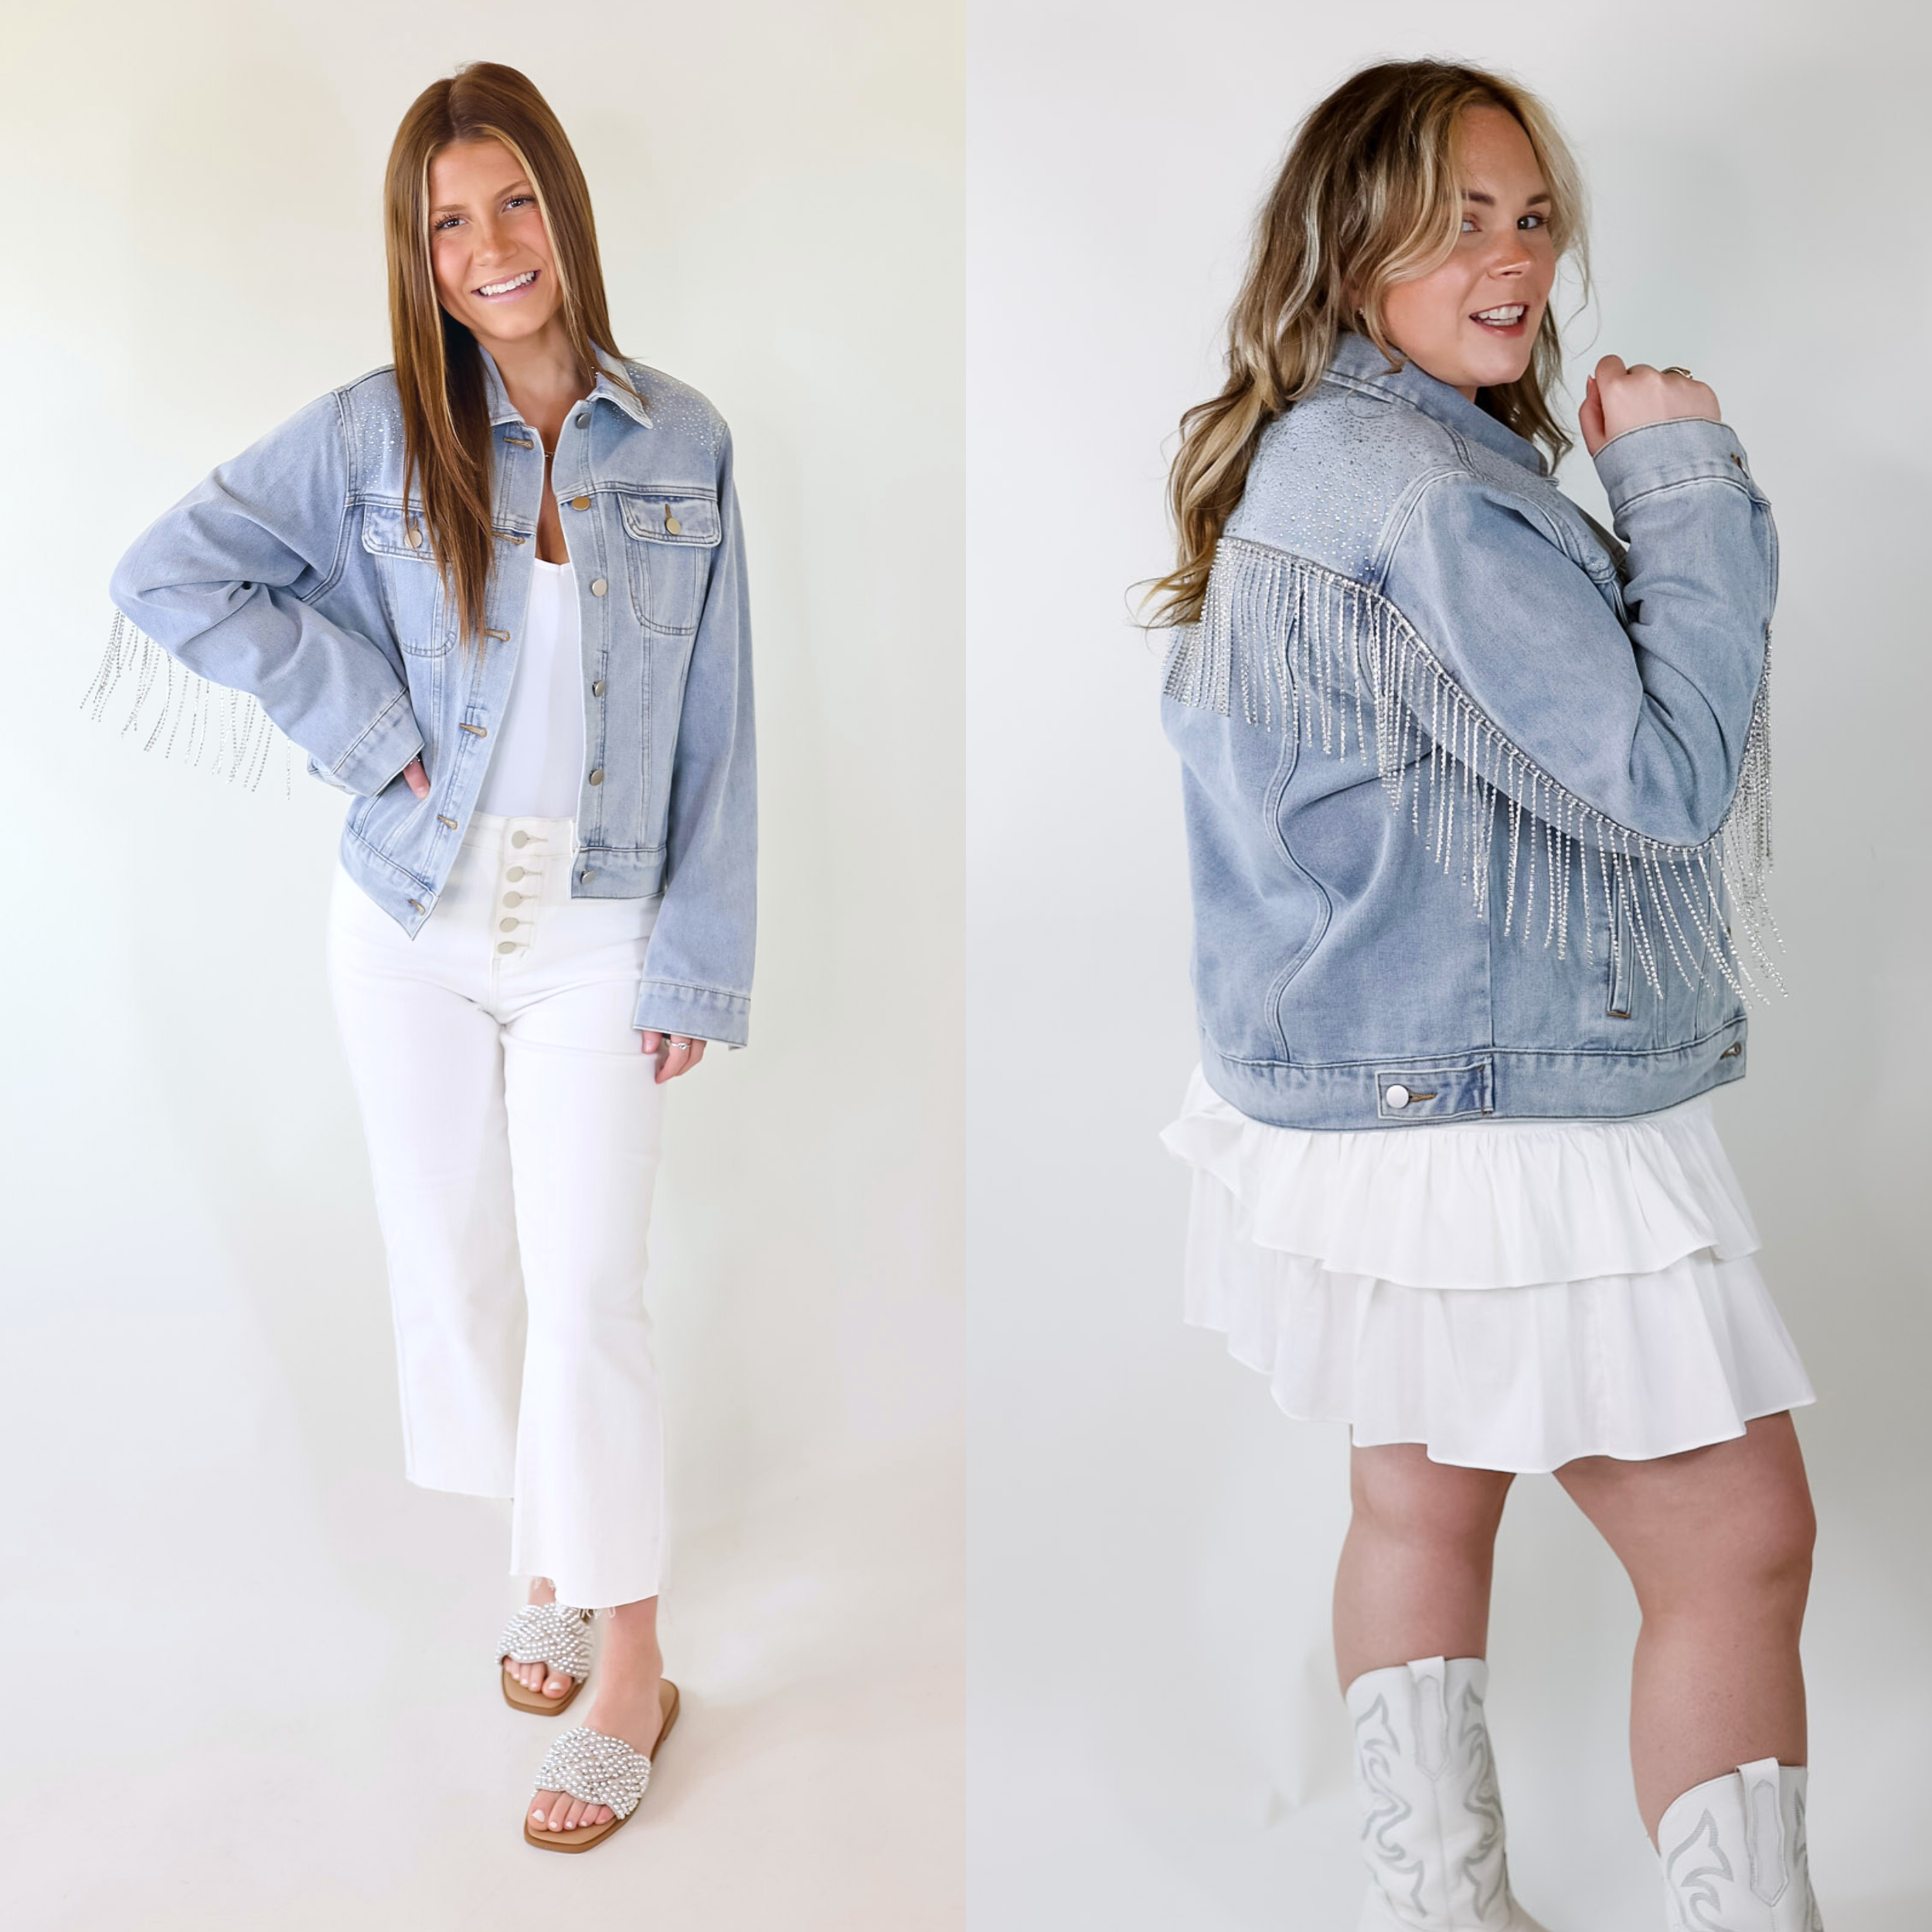 Model is wearing a light wash denim jacket featuring crystals near the shoulders, a crystal fringe on the back, pockets, collar, and button up front with a white background.